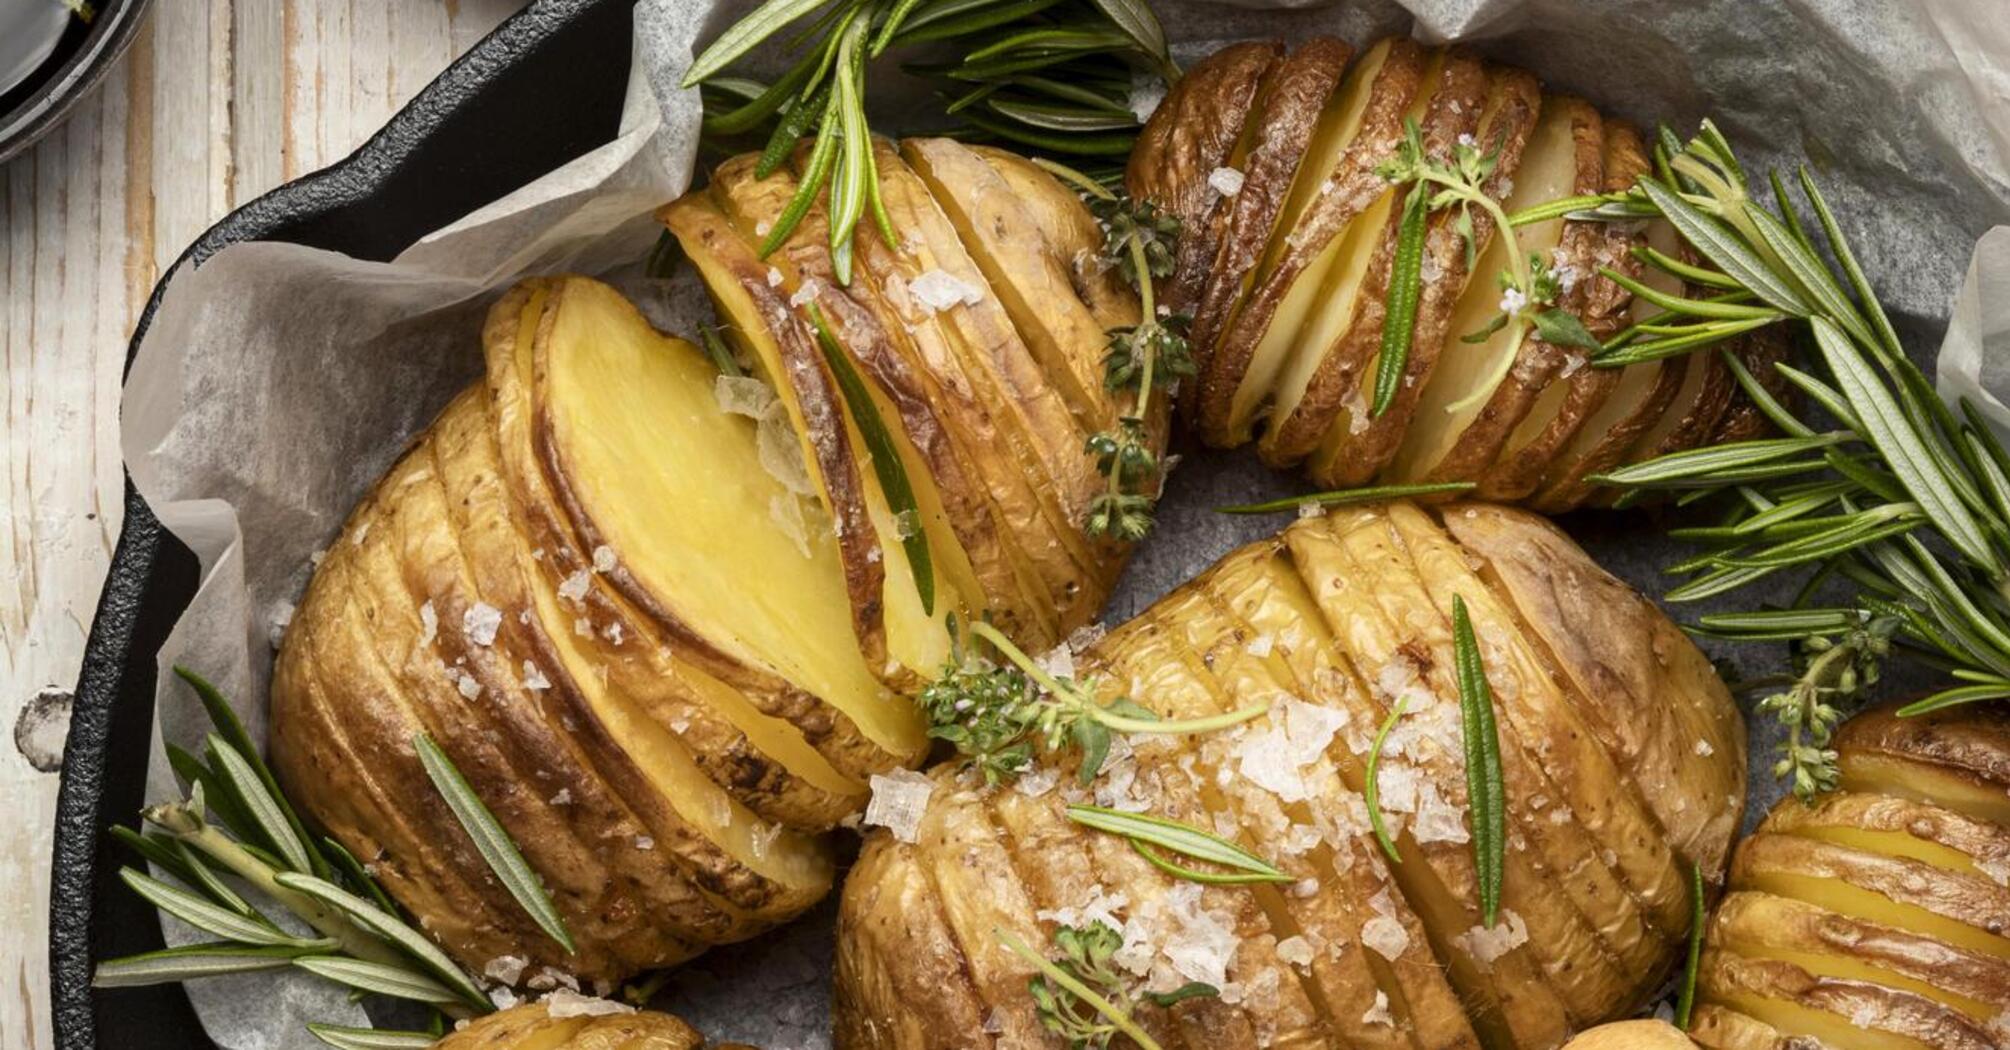 For guests or just for dinner: delicious and beautiful potatoes with bacon